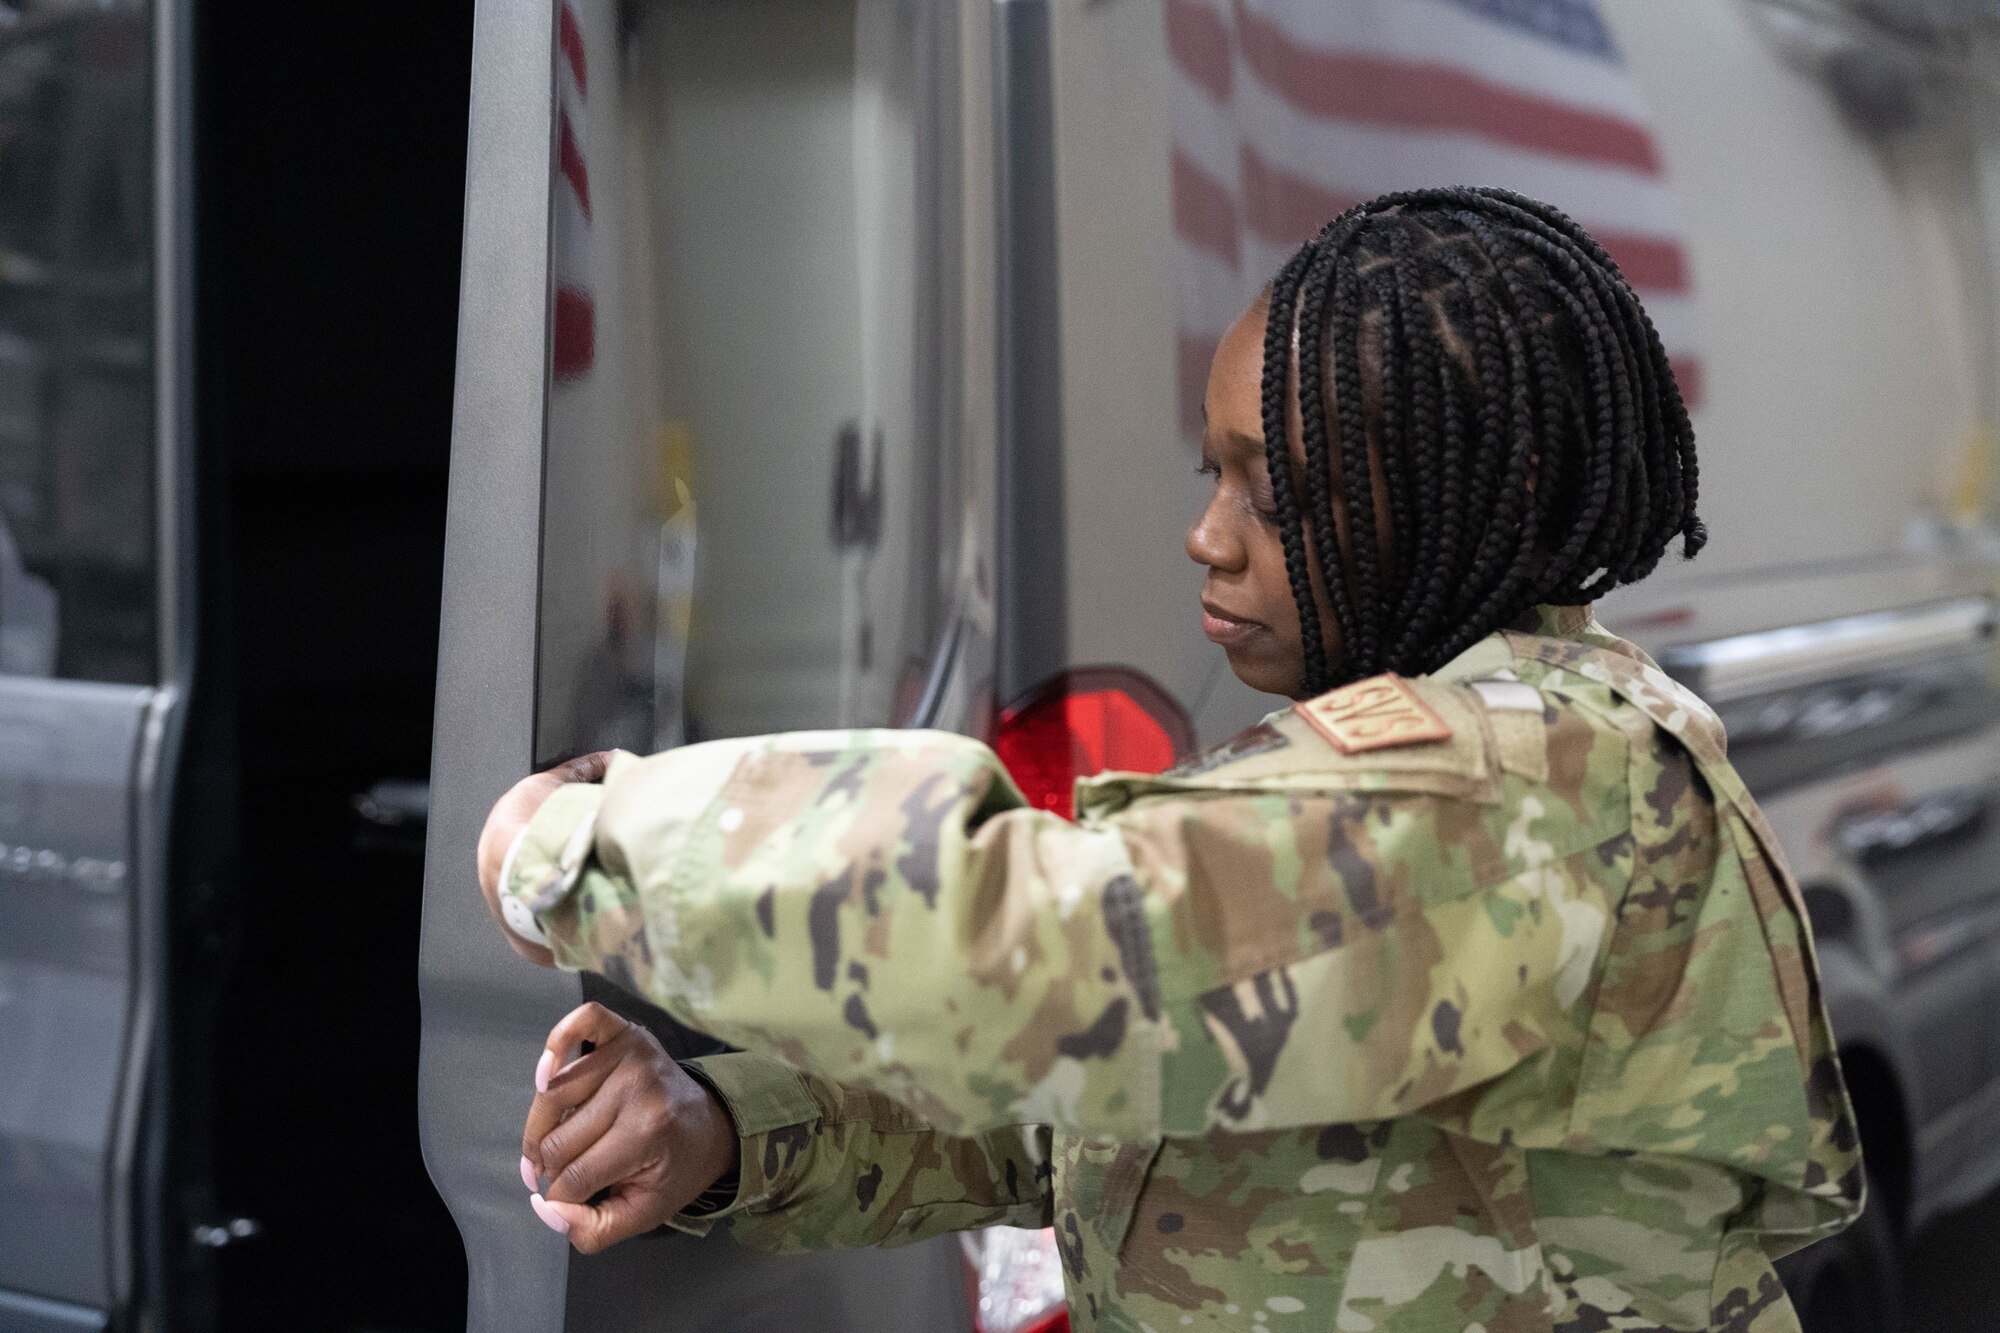 Senior Airman Alicia Davis, Force Support Contingency Training-Mortuary student at Air Force Mortuary Affairs Operations, practices door attendant duties at Dover Air Force Base, Delaware, April 20, 2023. FSCT-M students practice every facet of dignified transfers, including carries, door attendant duties and vehicle marshaling. Davis is assigned to the 514th Force Support Squadron, Joint Base McGuire-Dix-Lakehurst, New Jersey. (U.S. Air Force photo by Tech. Sgt. Katie Maricle)